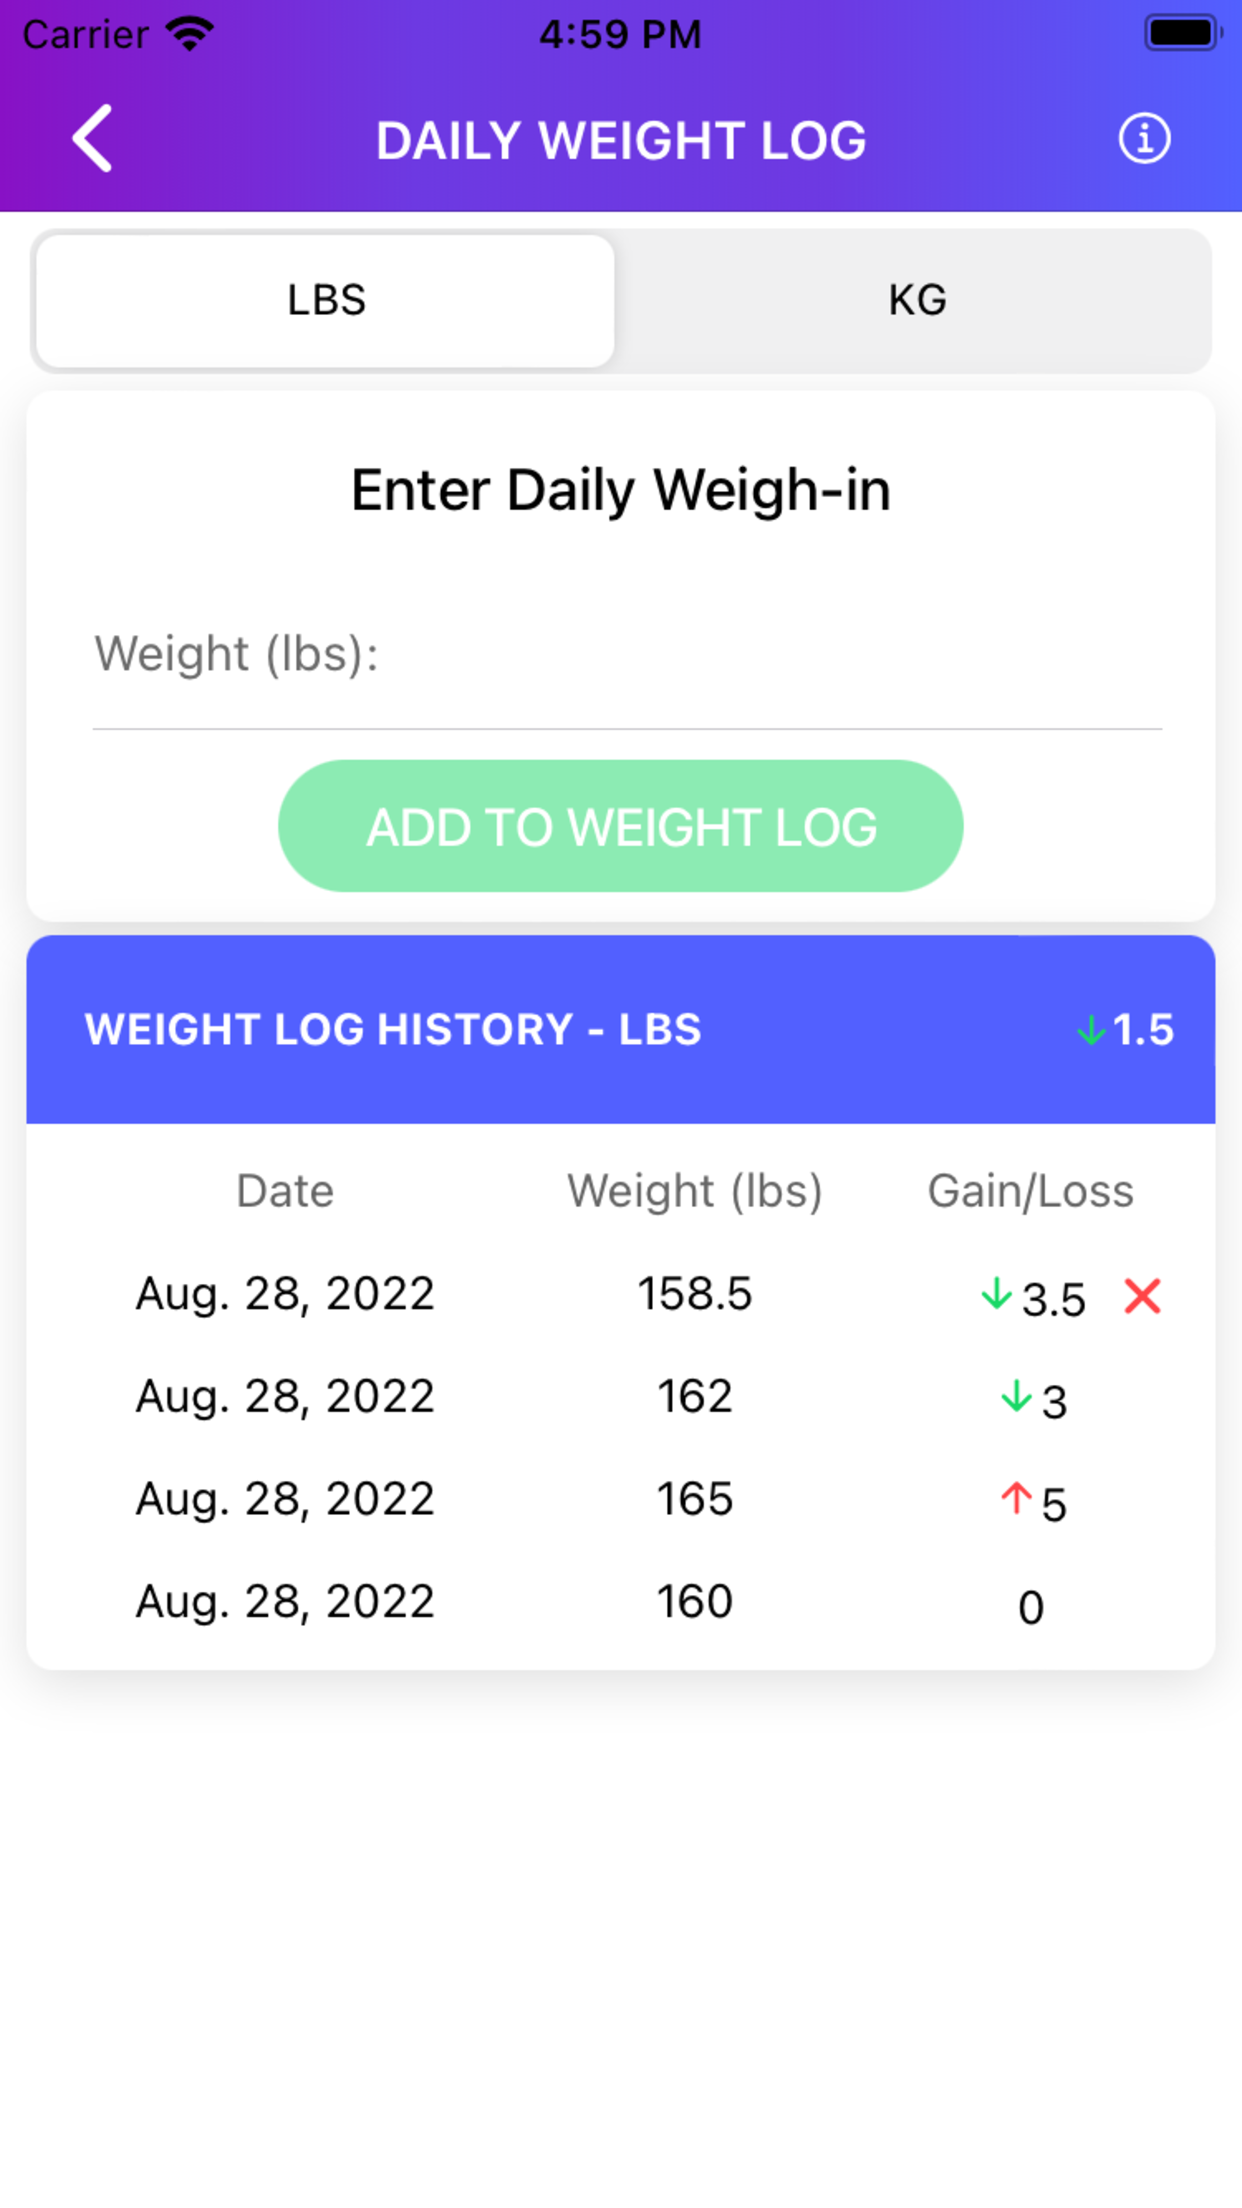 Weight Watchers 360 Points Plus Calculator Bigger Buttons 2013